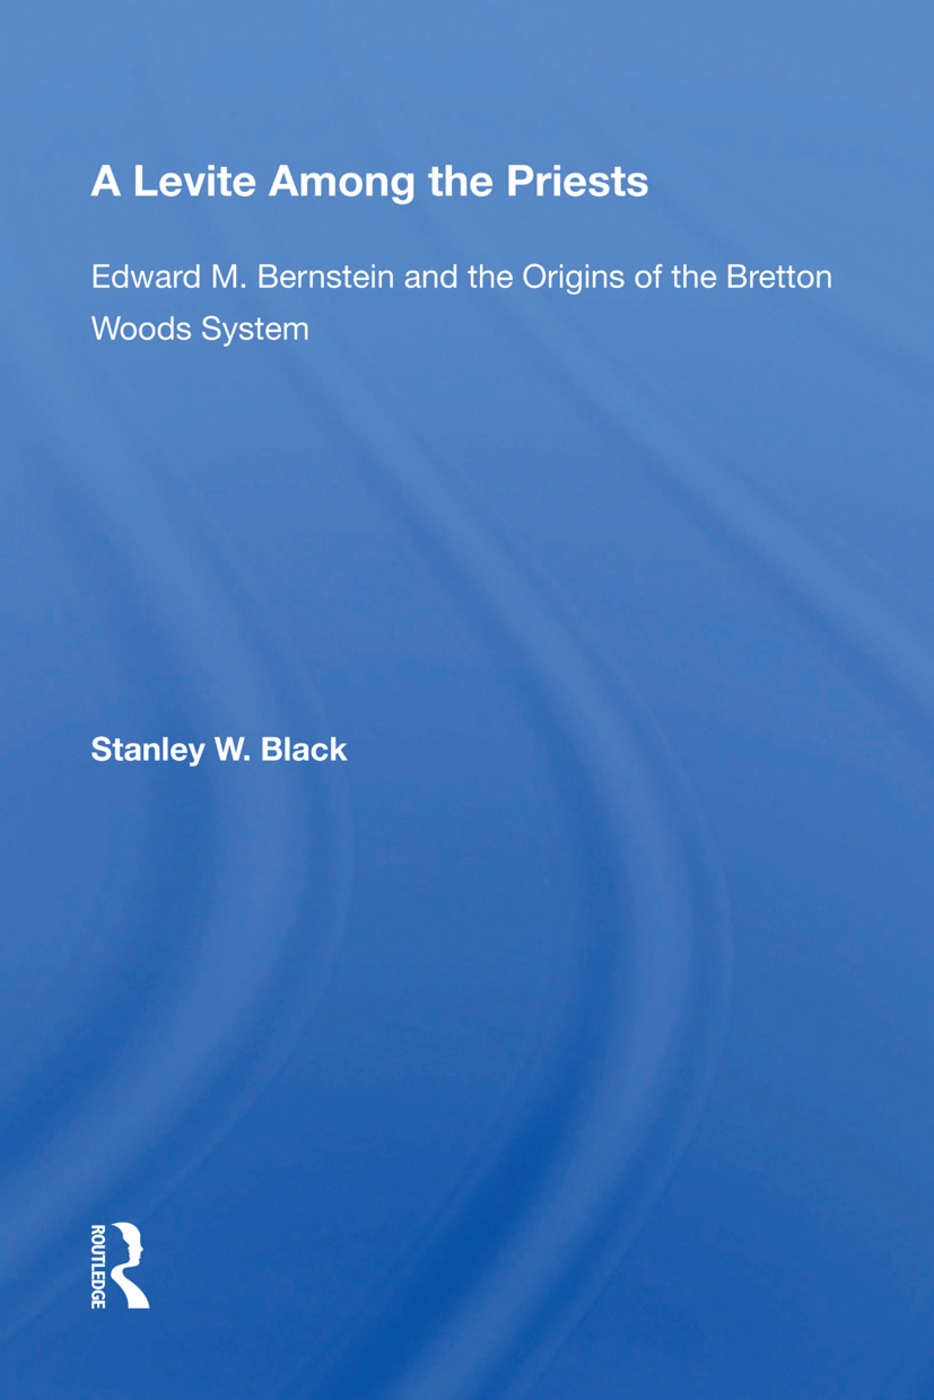 A Levite Among the Priests: Edward M. Bernstein and the Origins of the Bretton Woods System